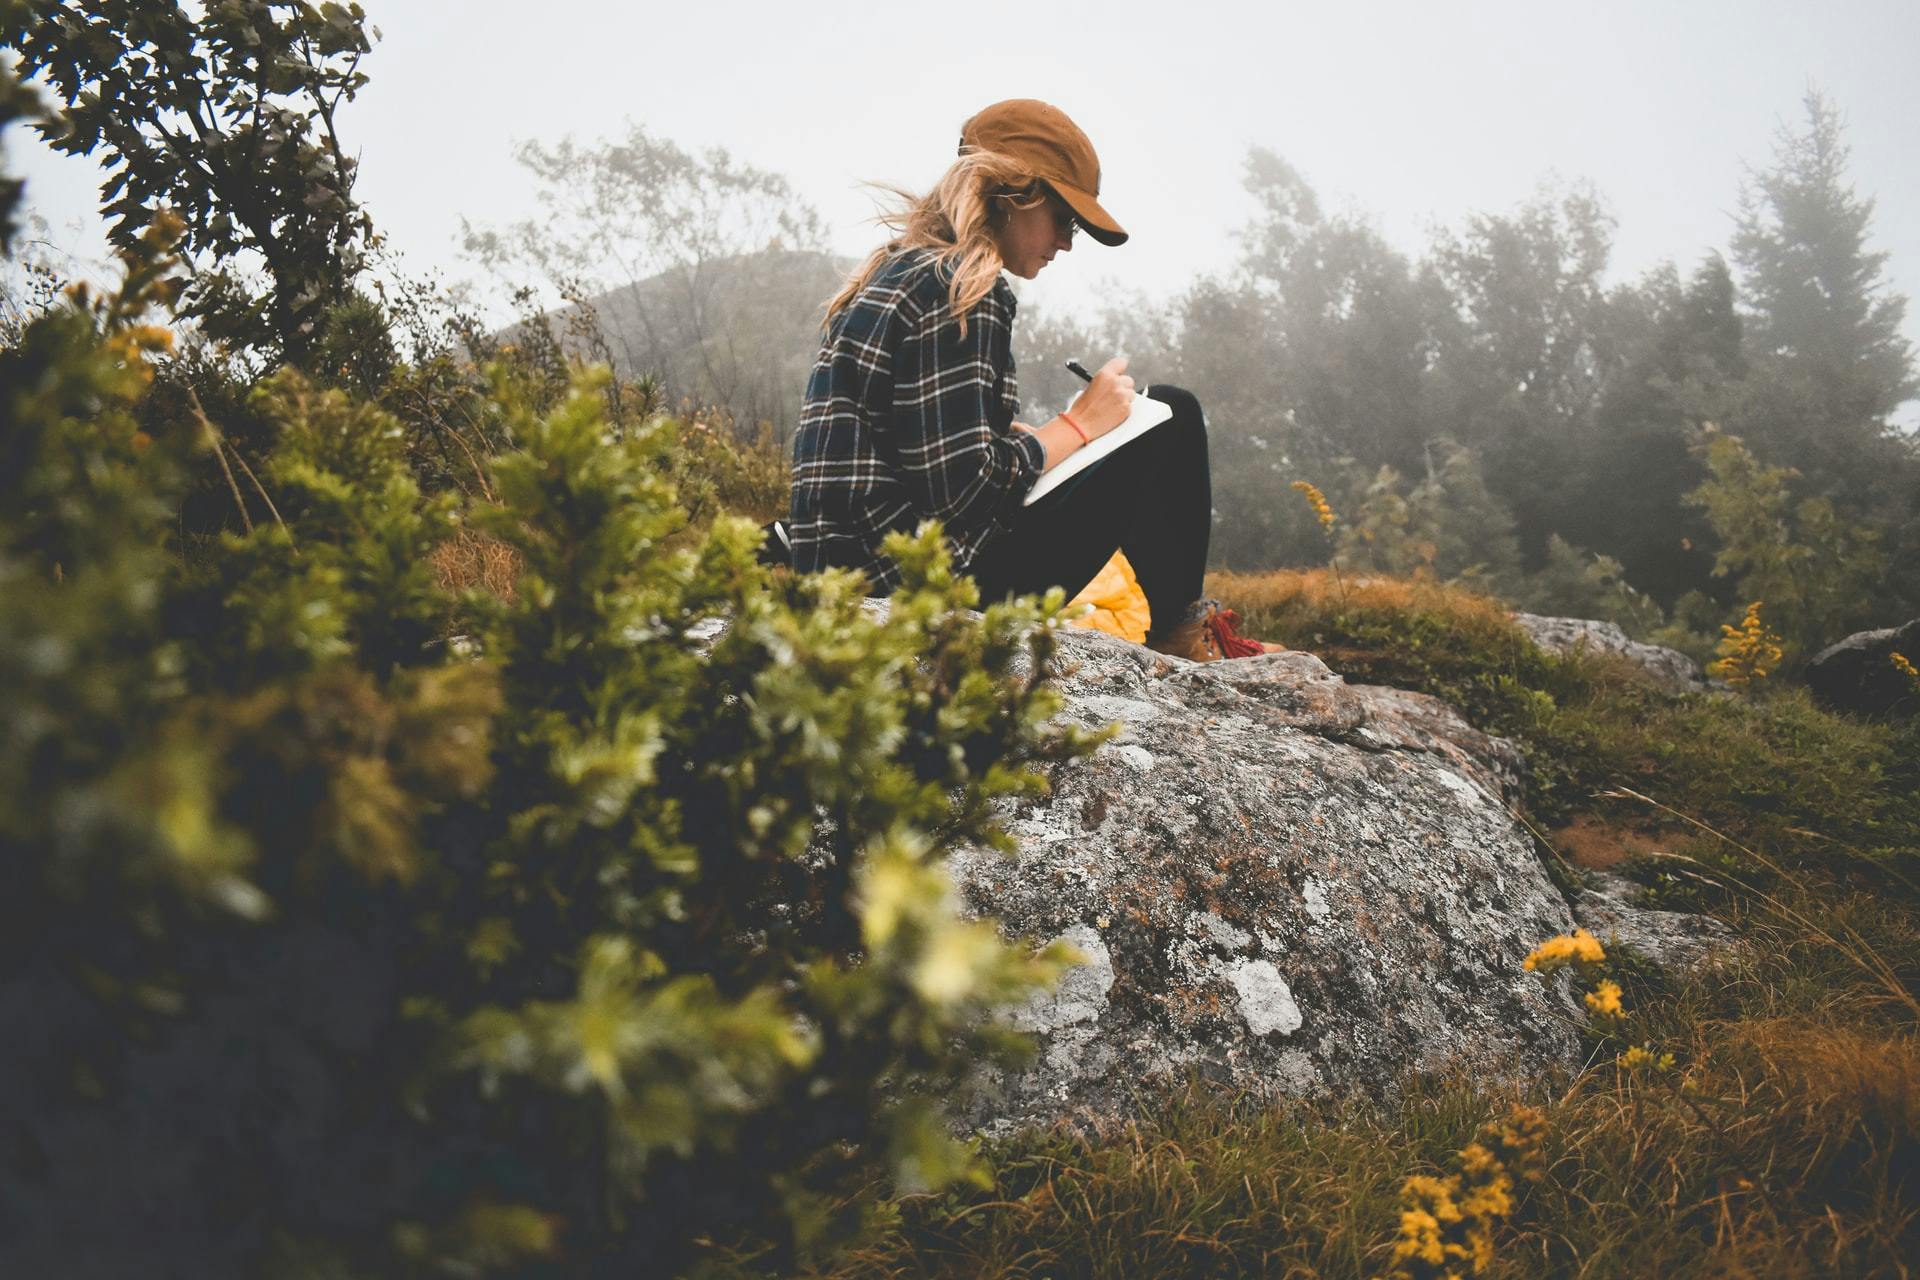 a writer showing humility in nature - Photo by Ashlyn Ciara on Unsplash